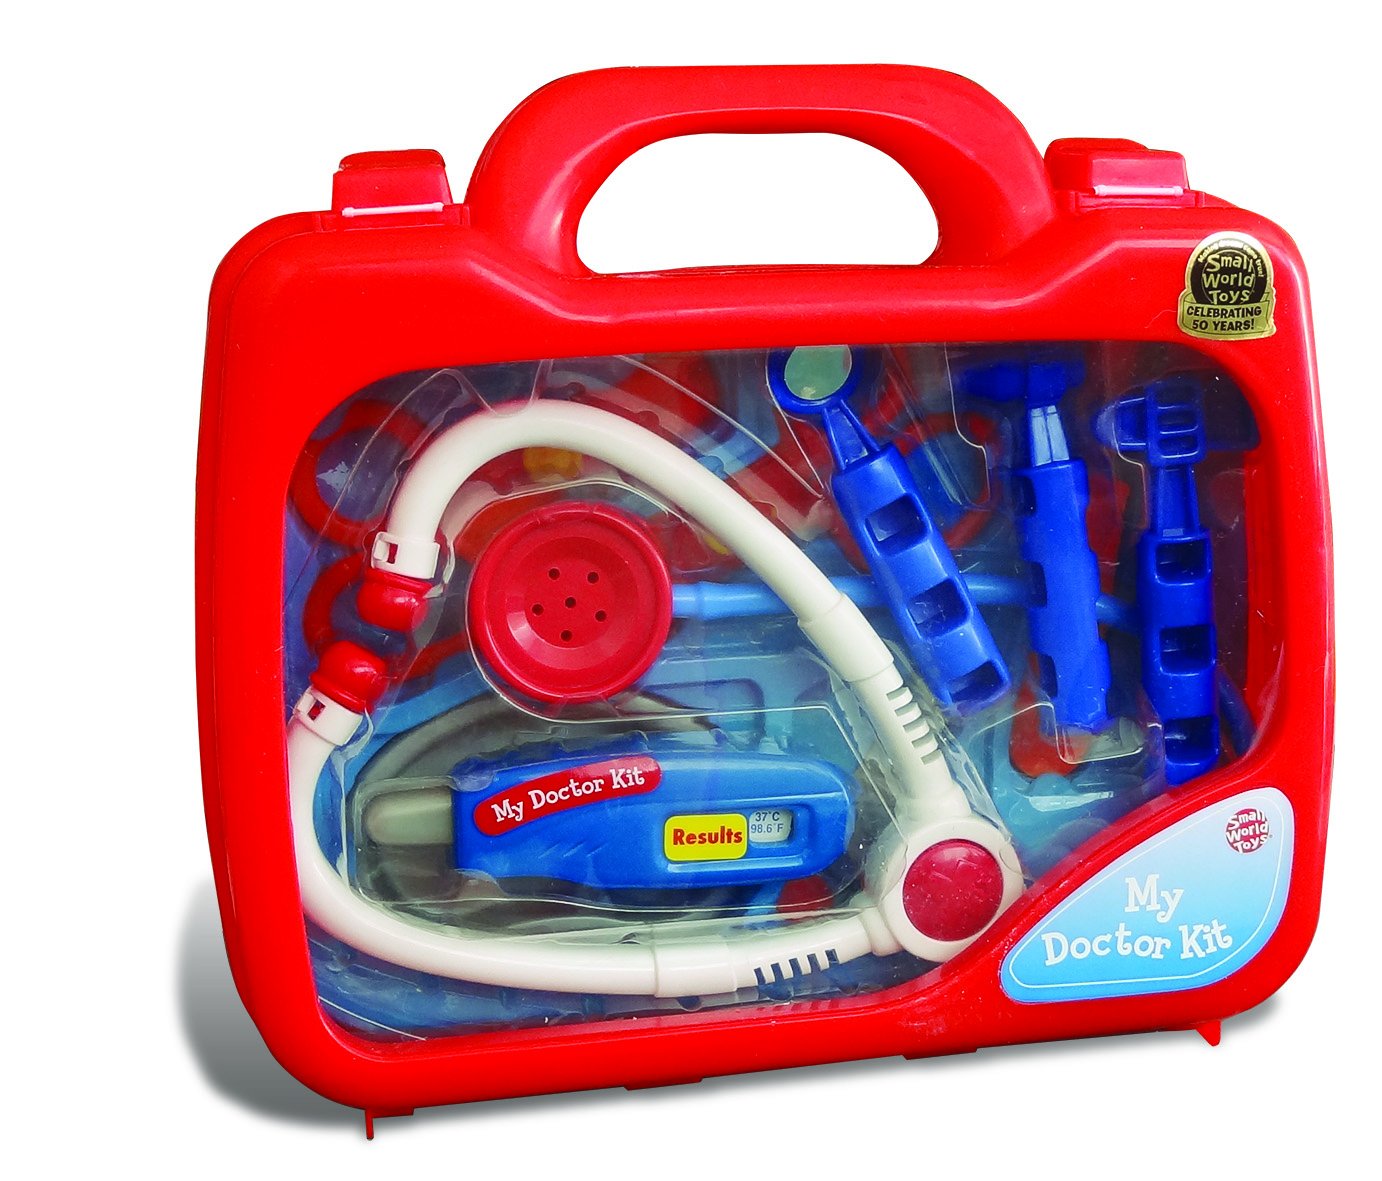 Small World Toys Imaginative Play - My Doctor Kit